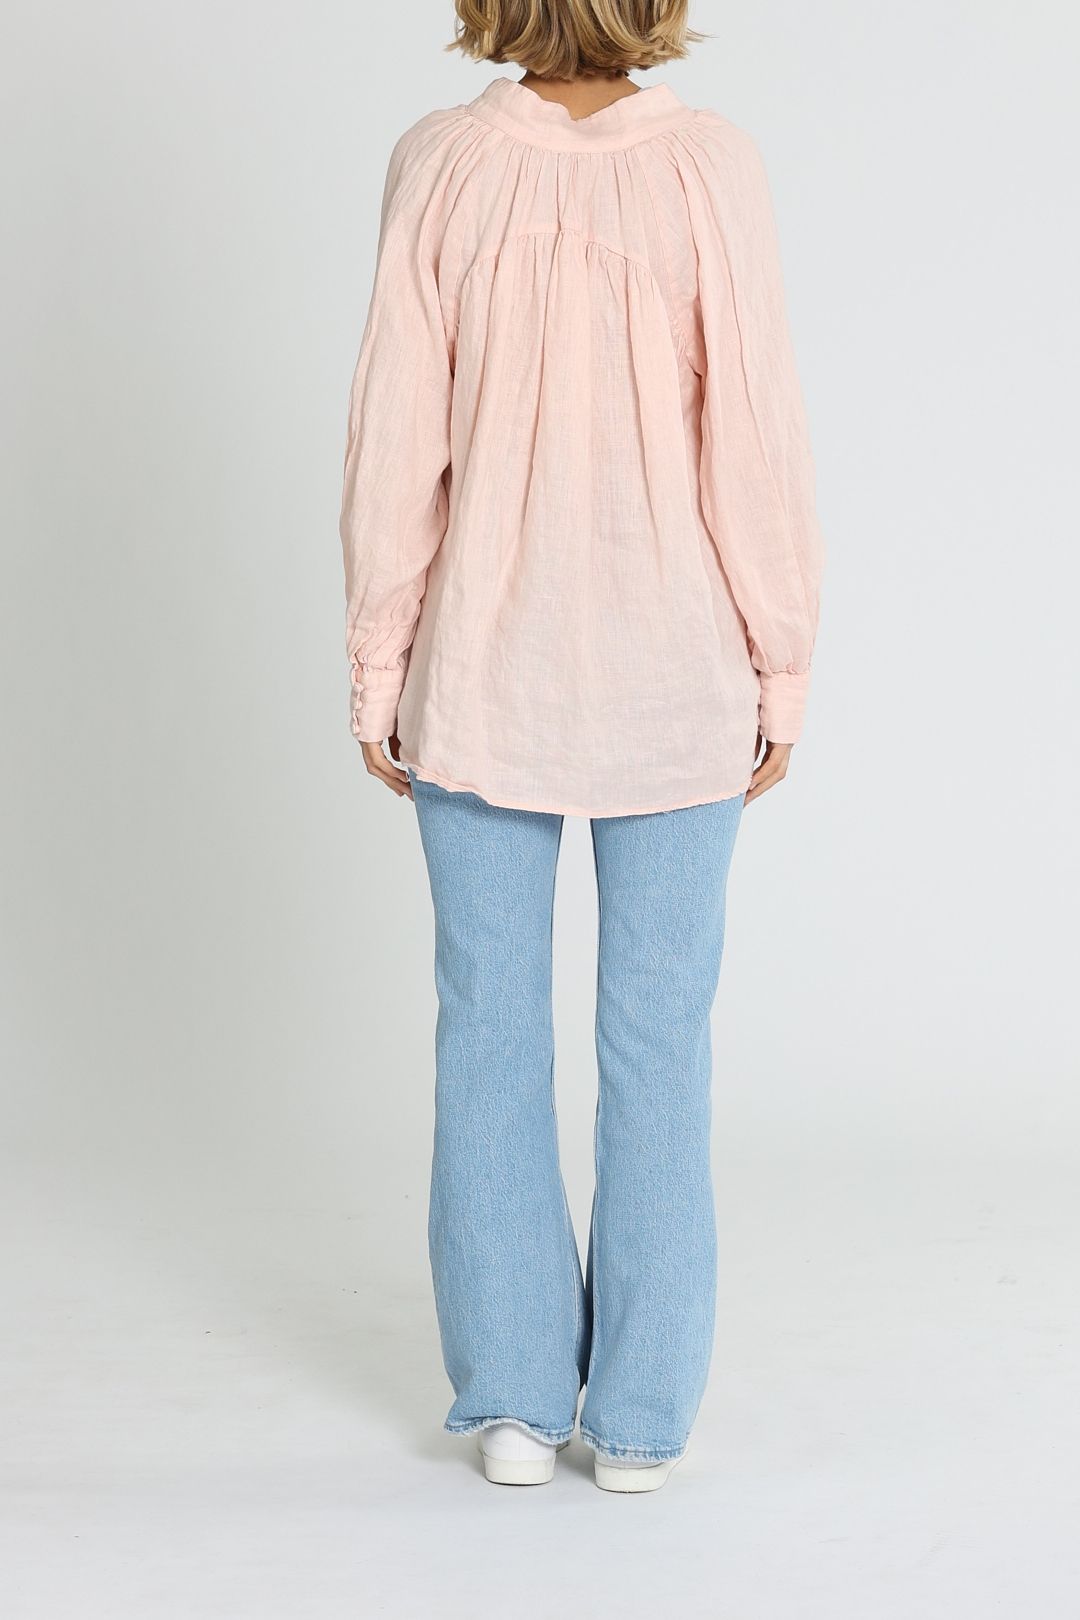 Bohemian Traders Wide Collar Button Up Top Soft Pink Linen Relaxed